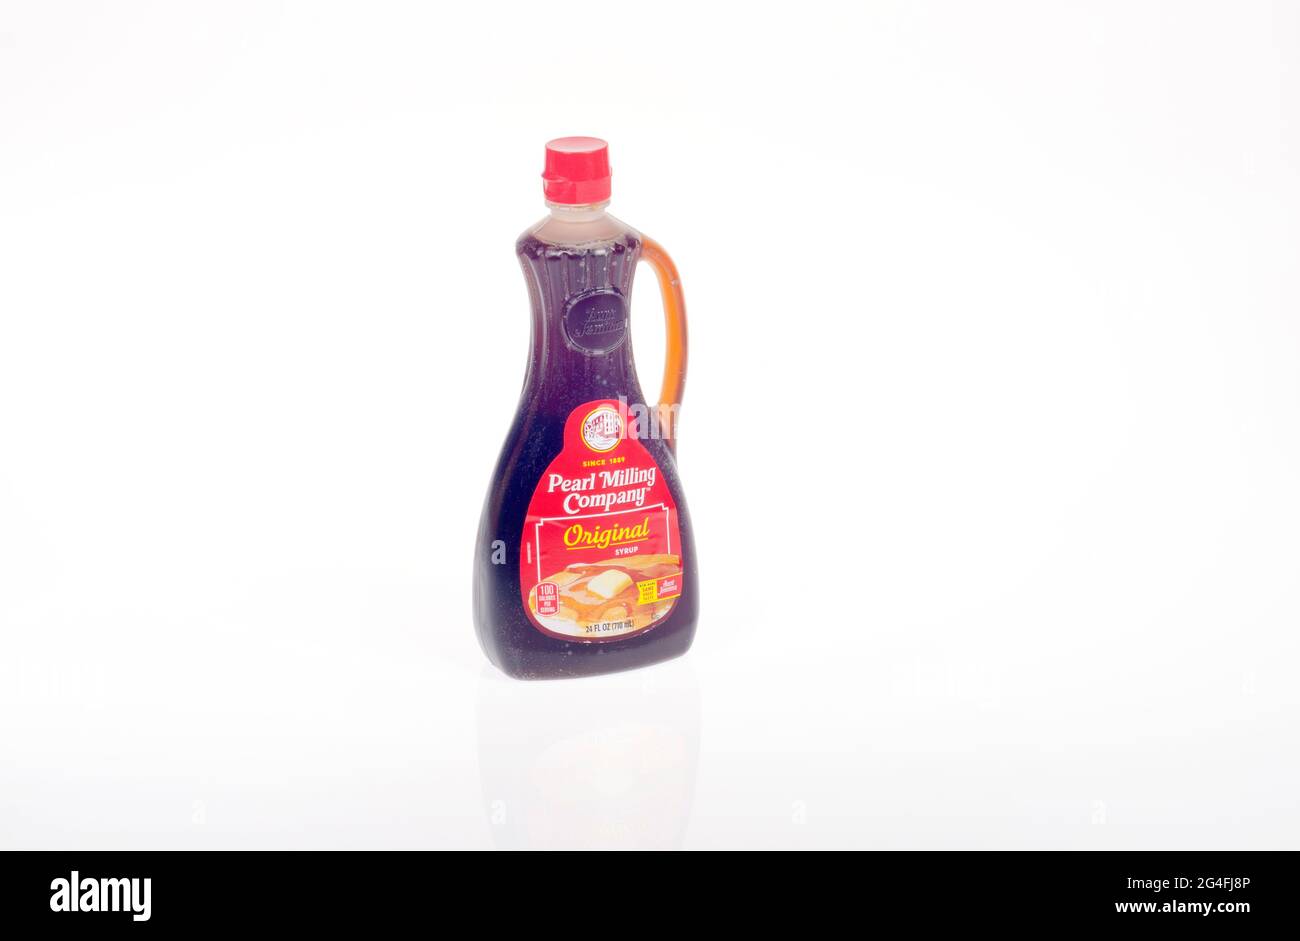 Pearl Milling, new identity for Aunt Jemima,  Original Syrup Bottle Stock Photo